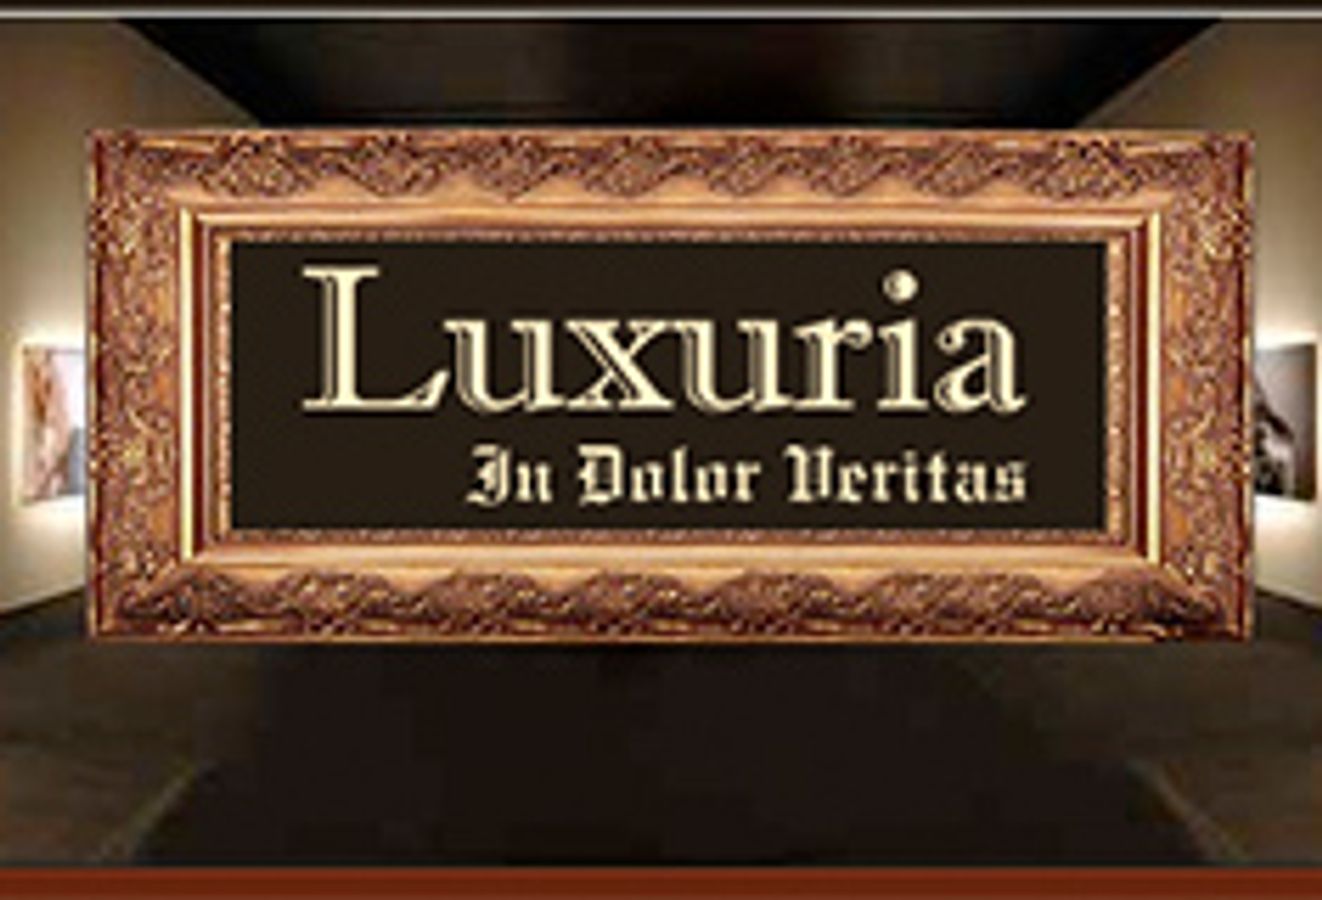 Luxuria Productions